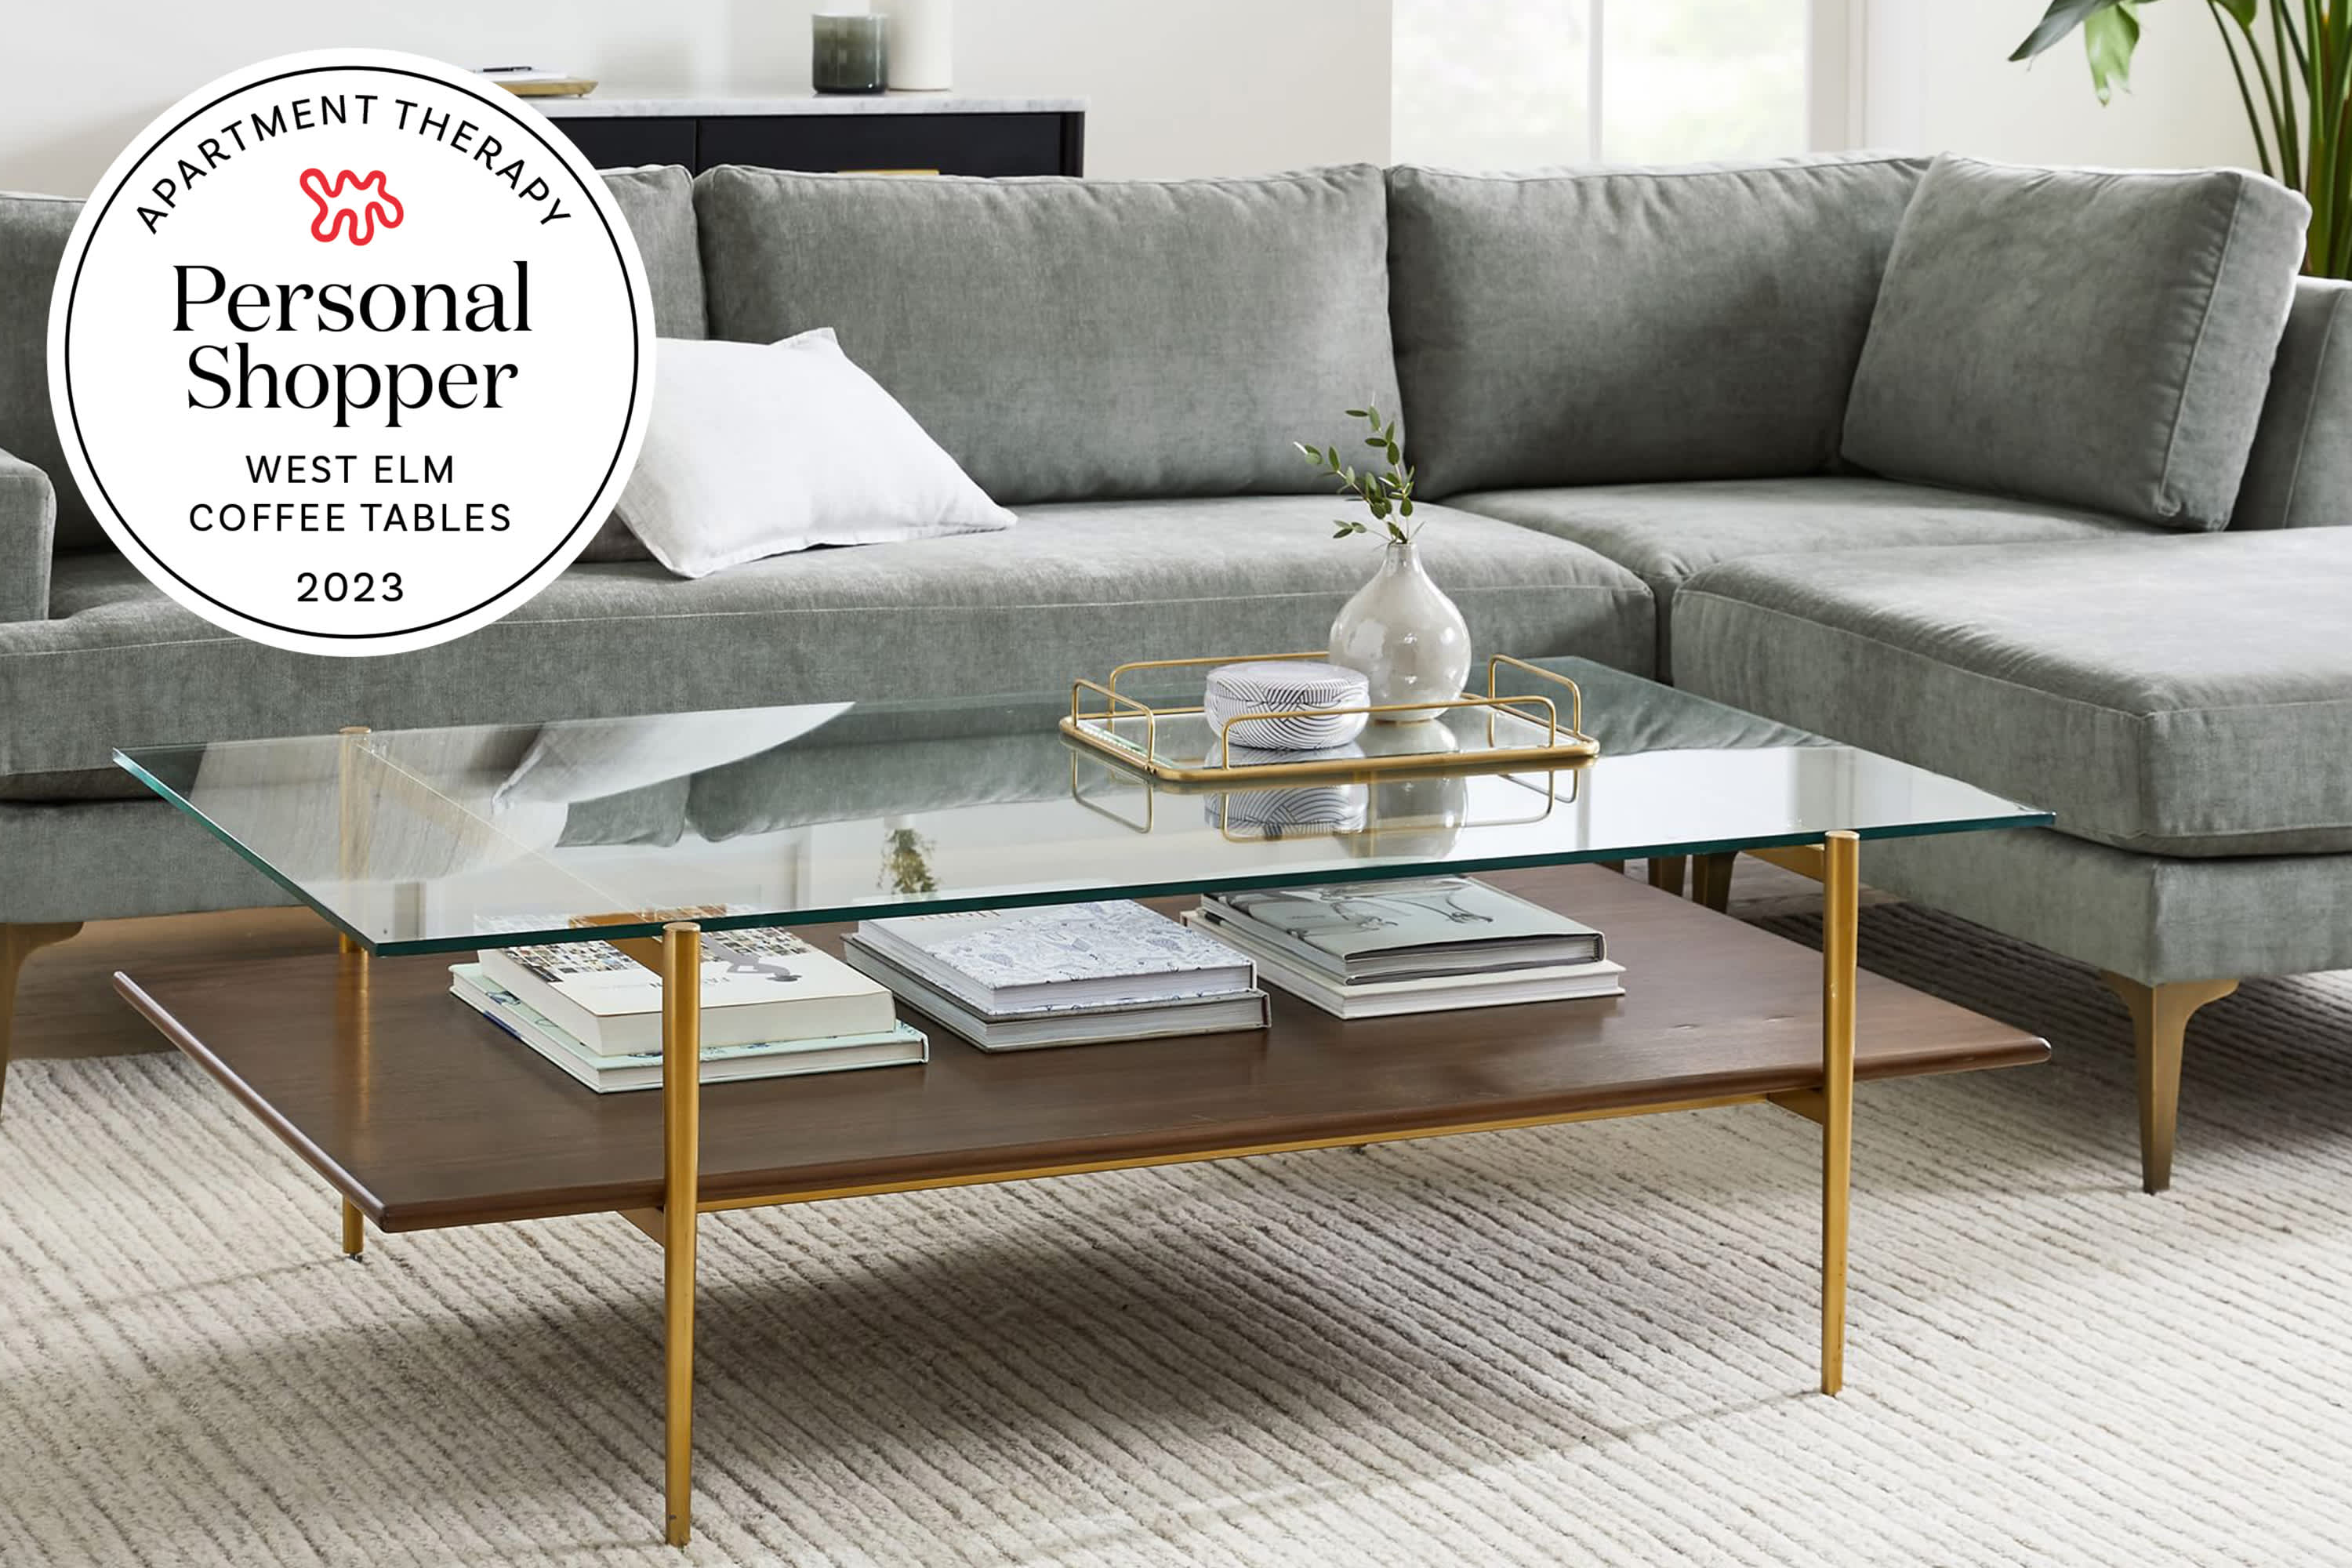 The Best Editor-Tested West Elm Coffee Tables 2023